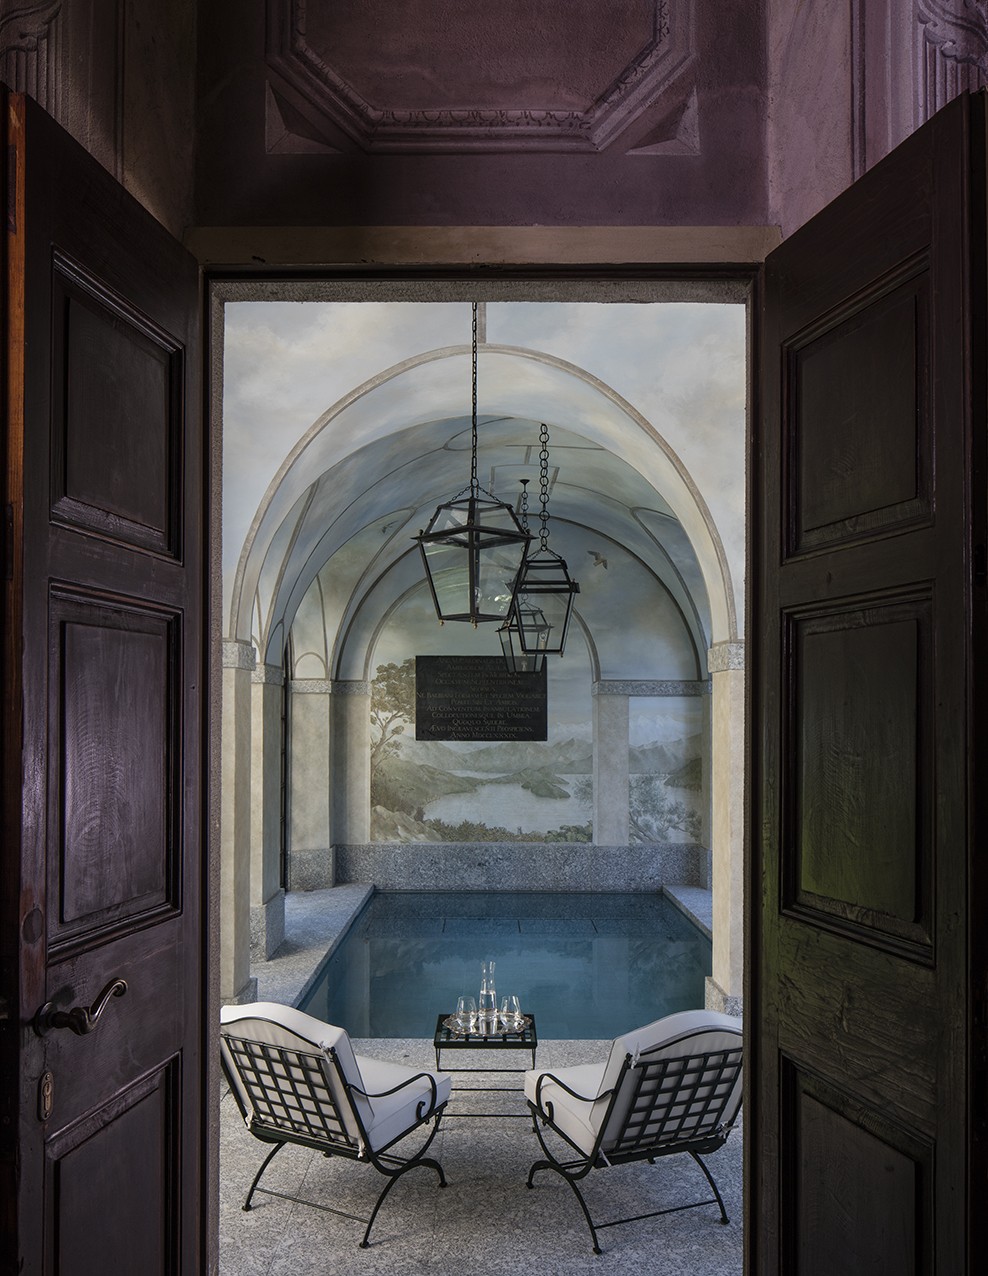 Villa Balbiano estate luxury property on lake Como guests can enjoy striking indoor swimming pool area accommodation best service